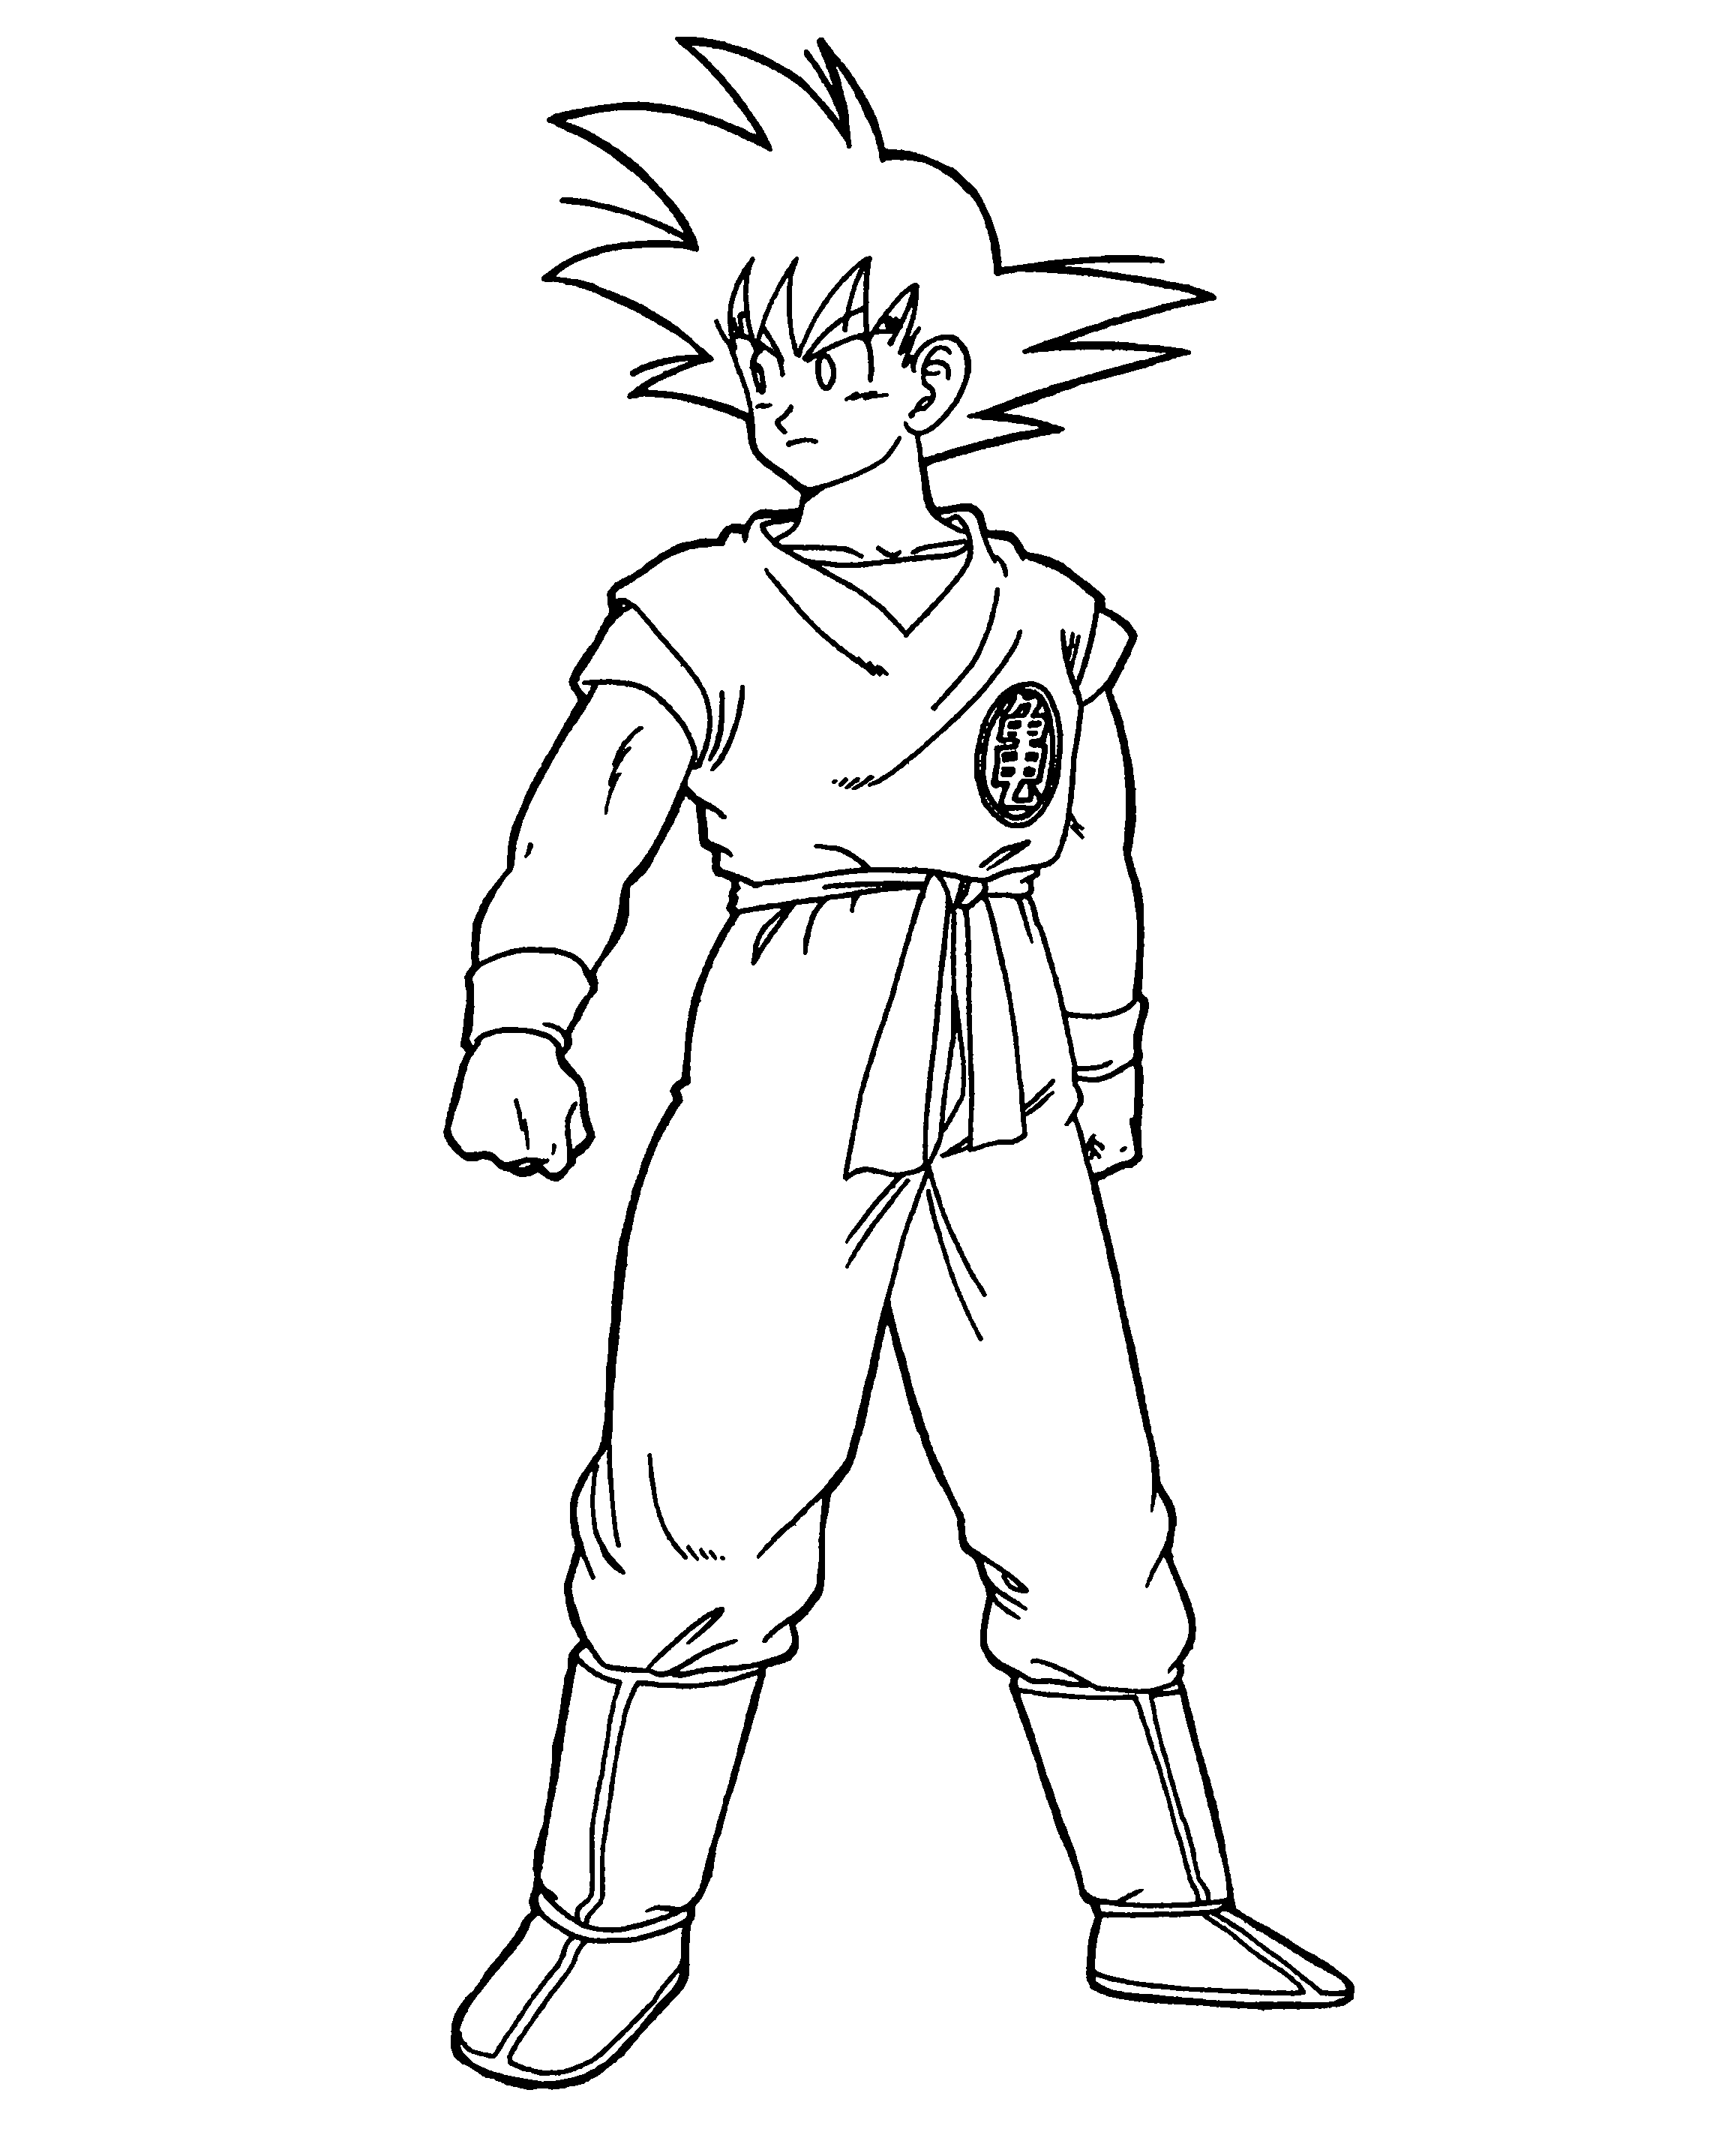 Dbz Coloring Pages Download - Coloring Home